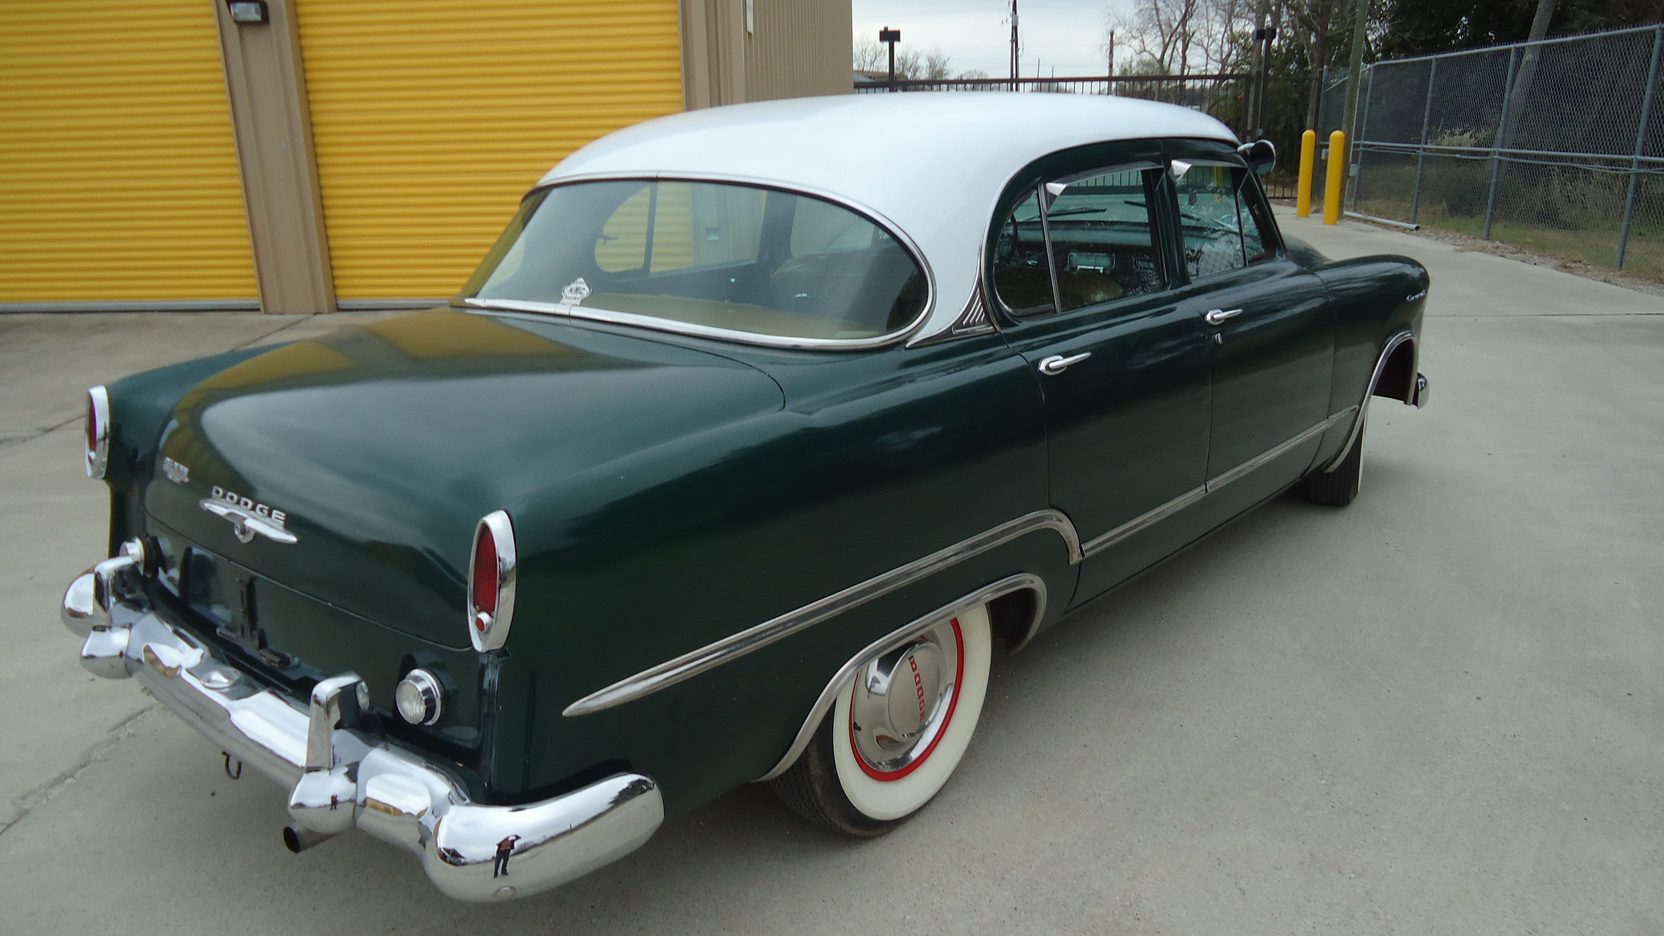 A parked 1953 Dodge Coronet